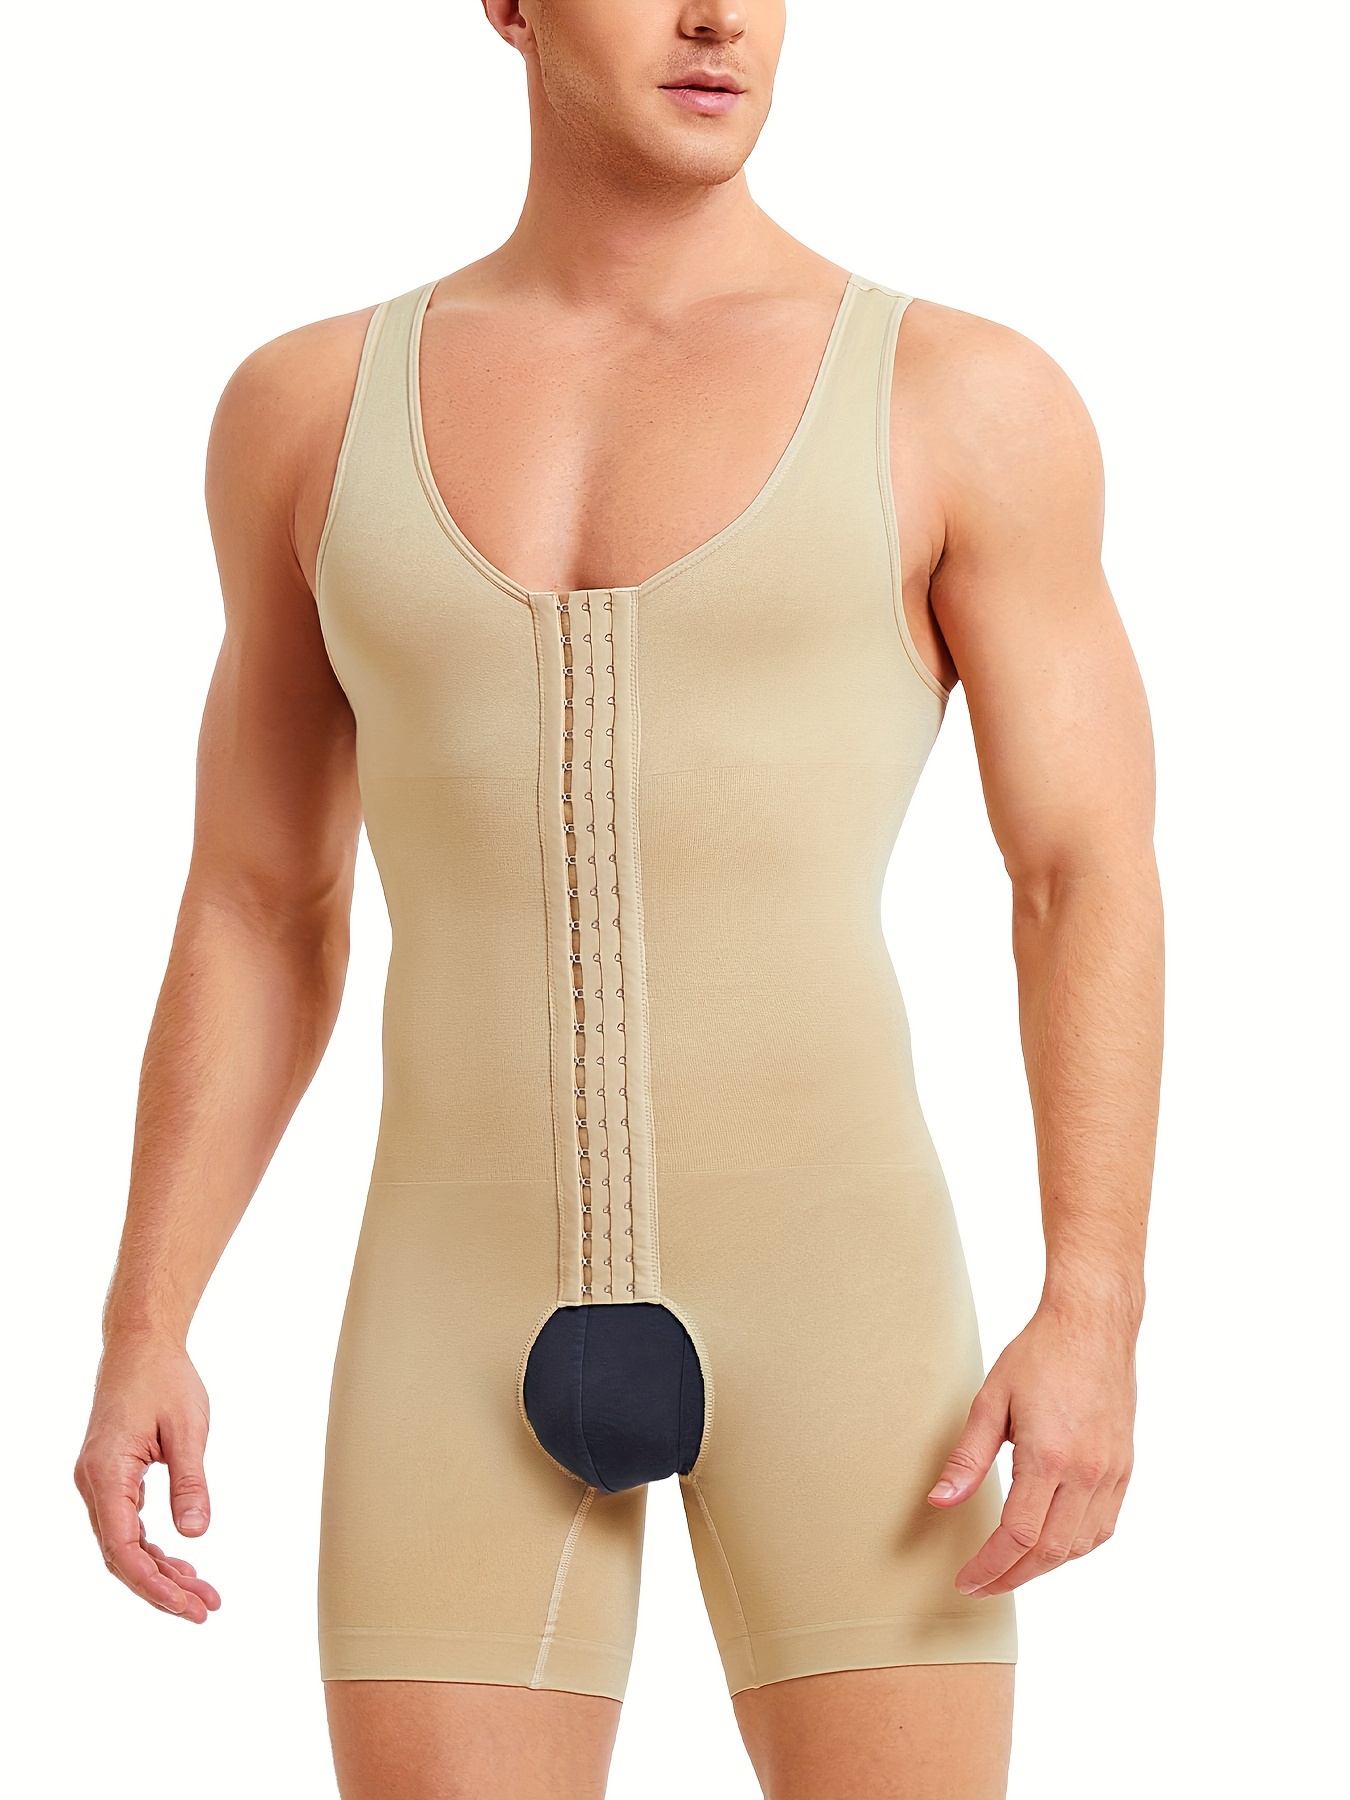  Full Body Compression Suit